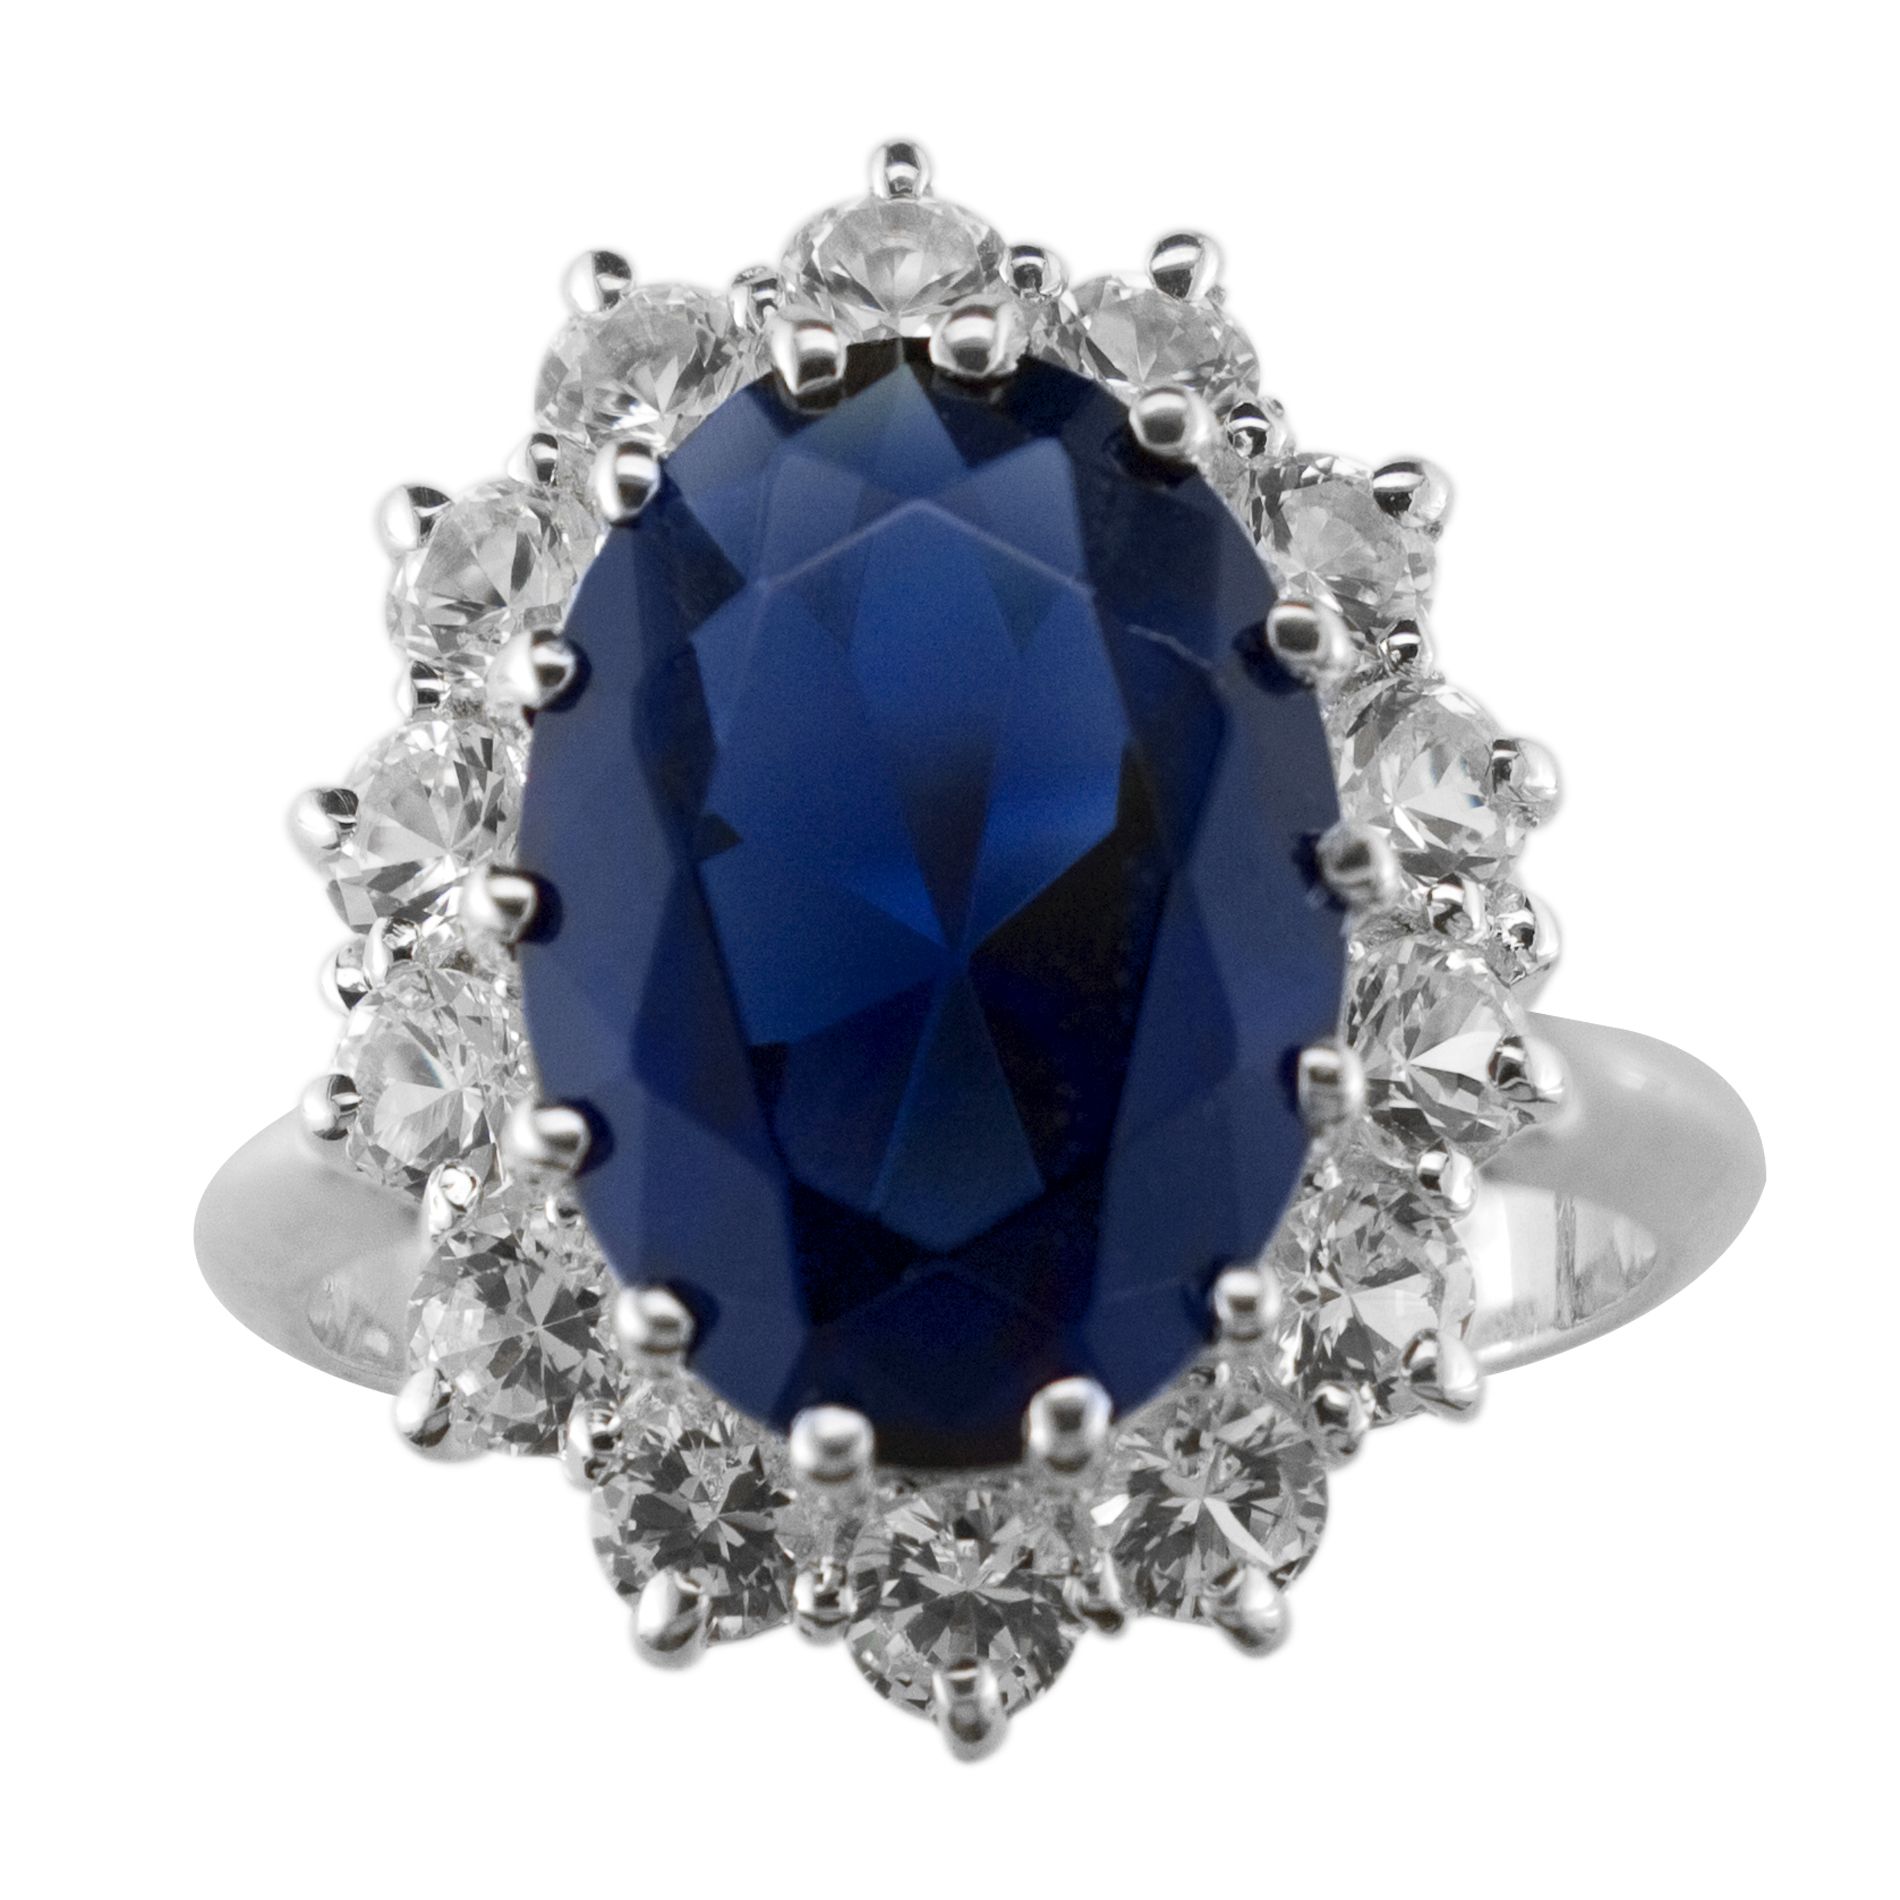 Synthetic Blue and White Sapphire Ring Supreme Elegance from Kmart